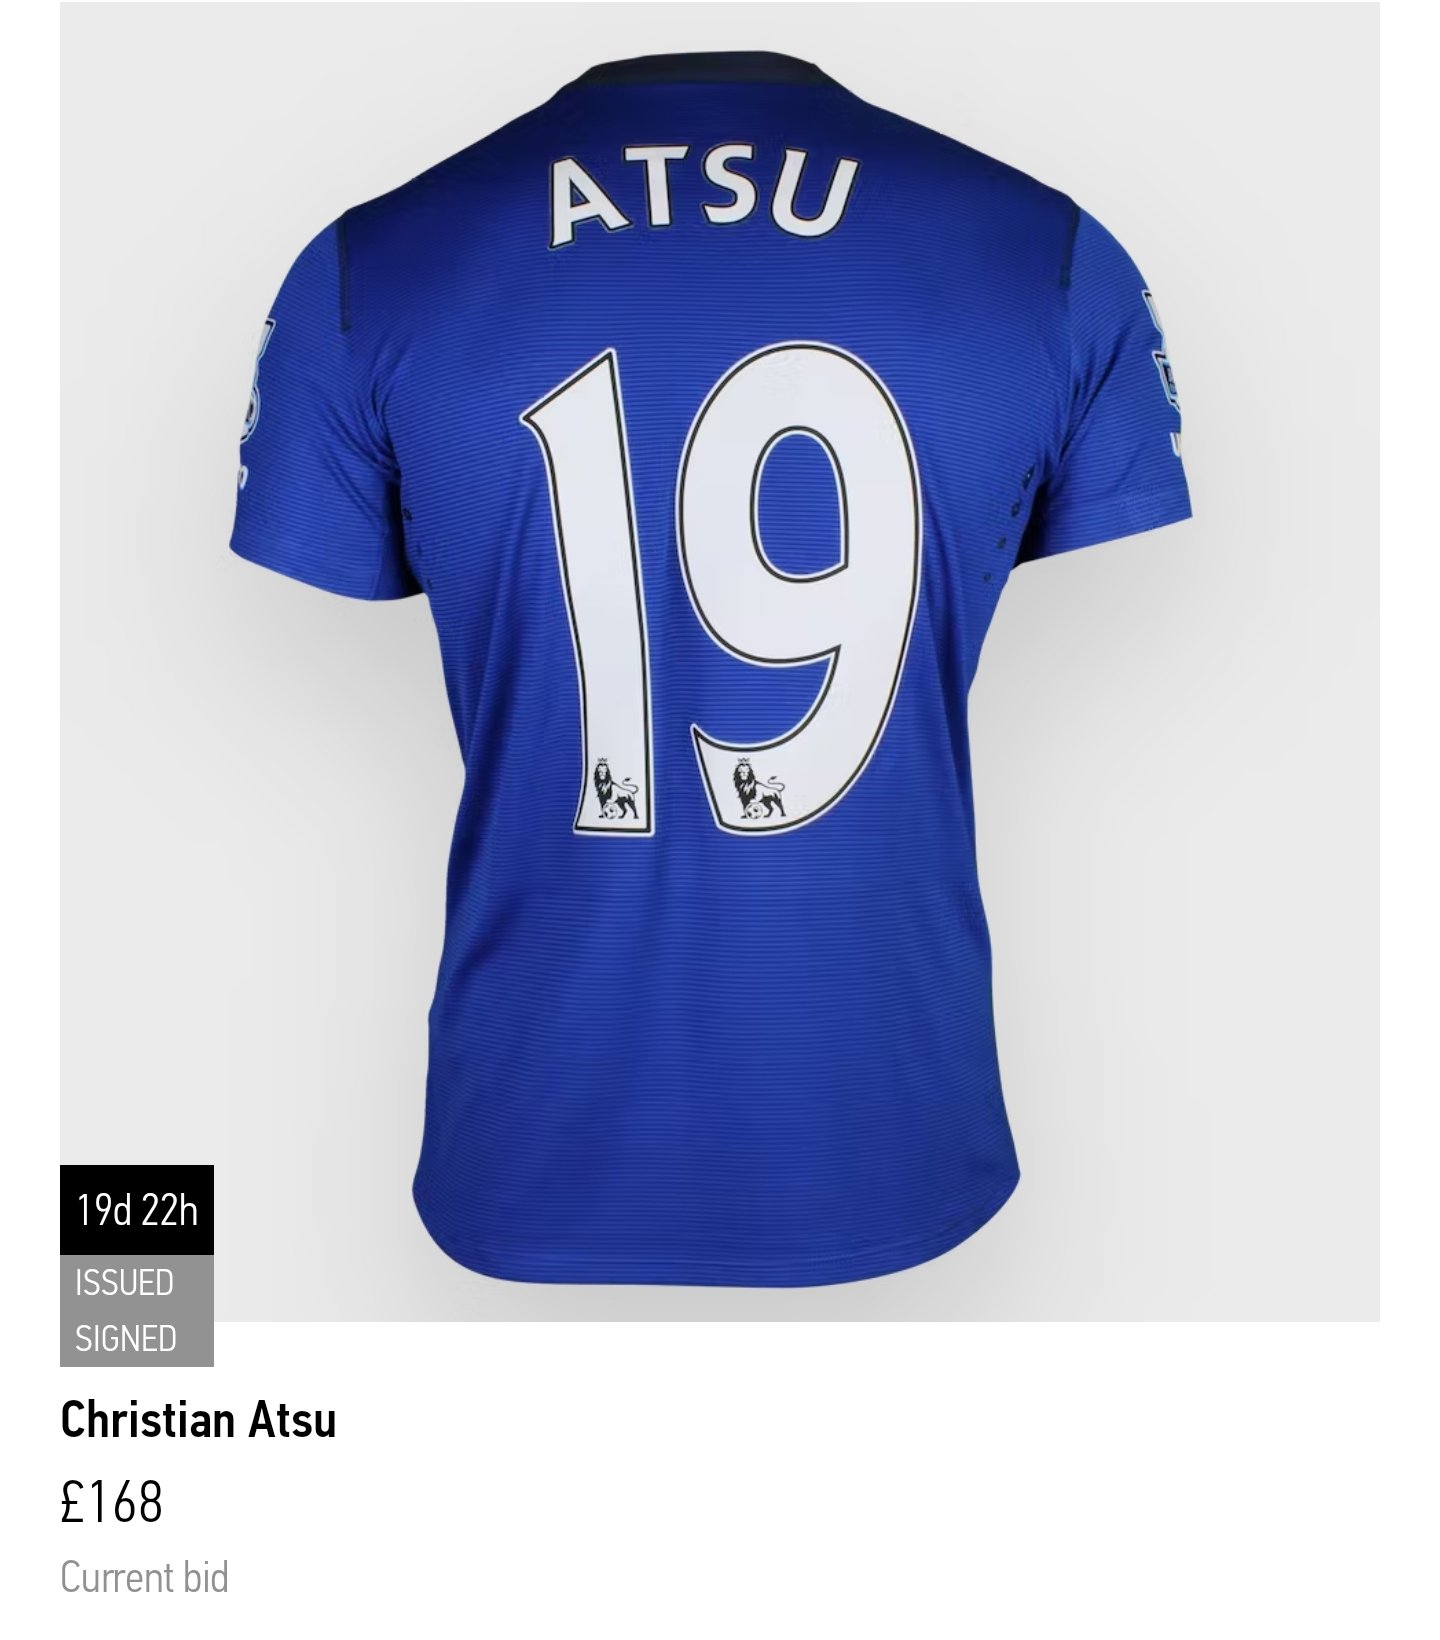 Chelsea to auction jerseys worn against Everton to fund completion of Atsu’s school